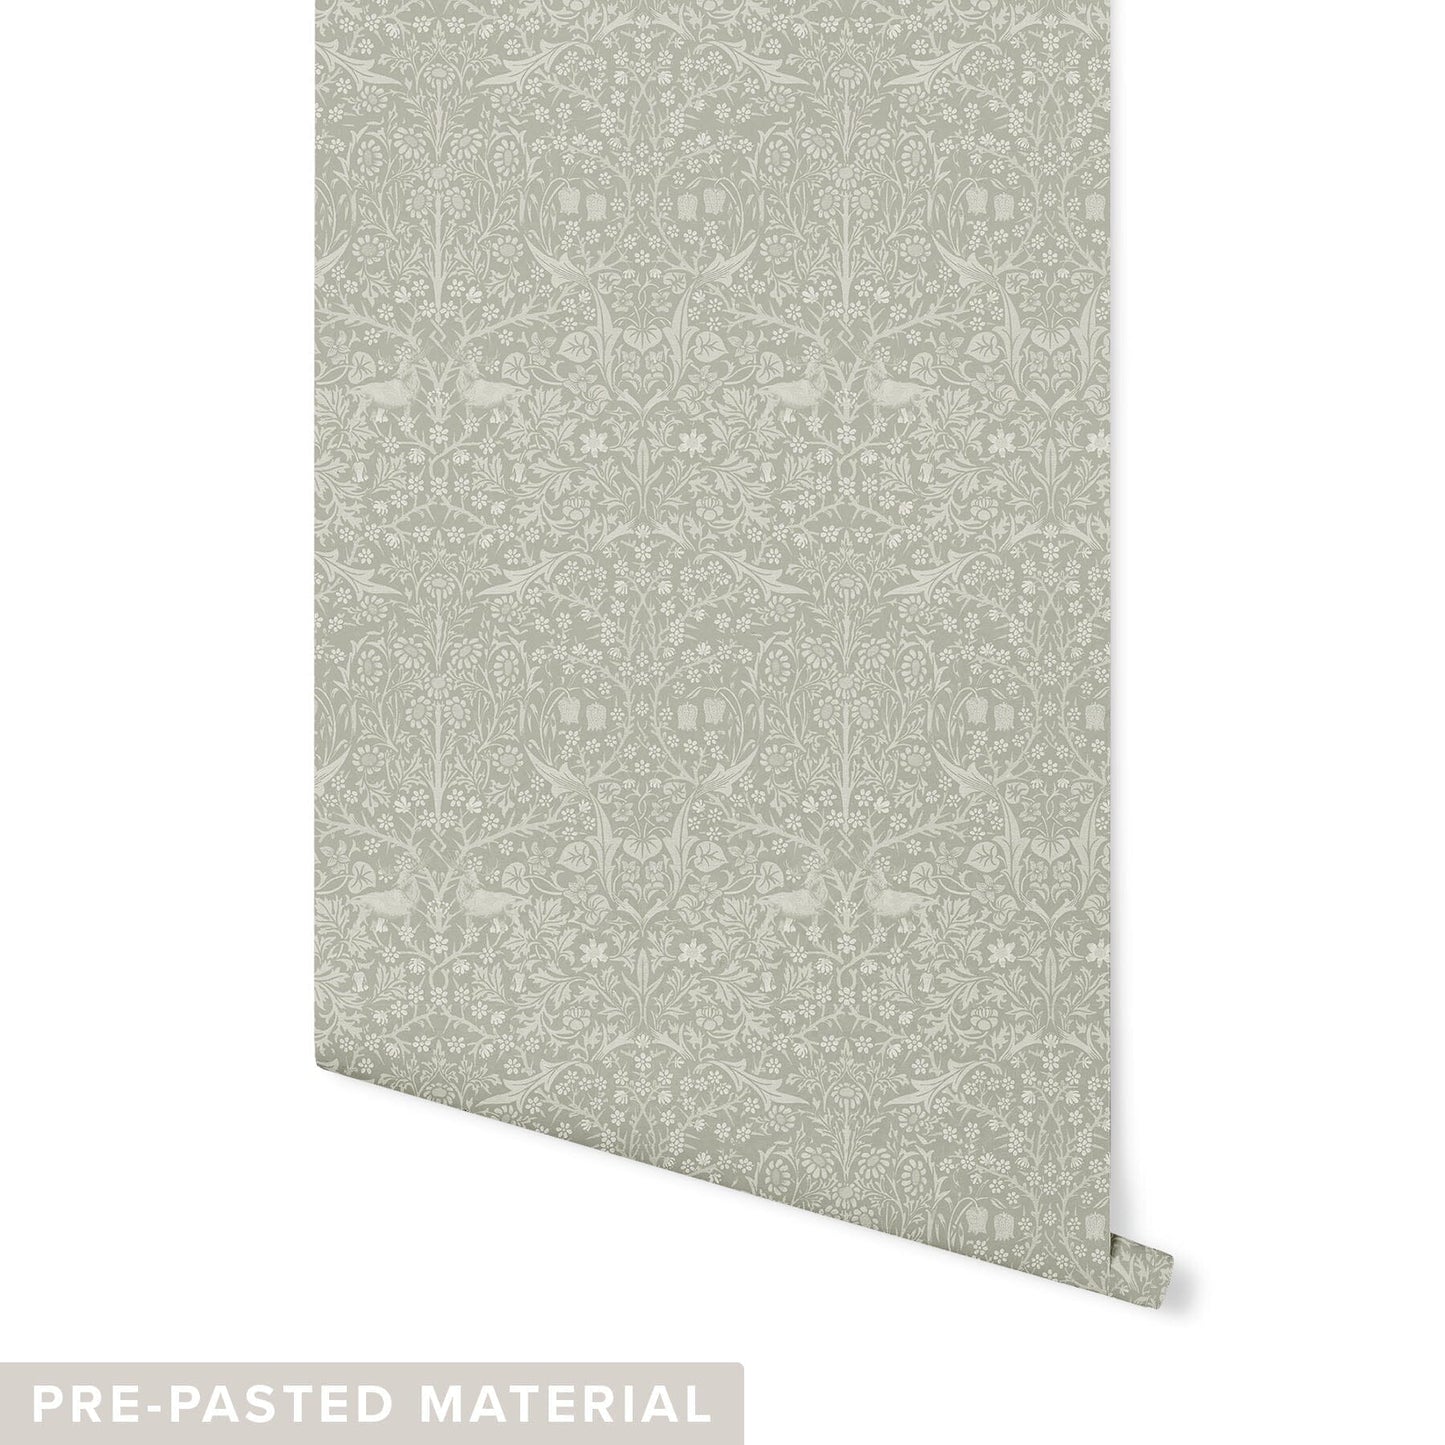 Northern Expedition Wallpaper Wallpaper Mia Parres Pre-pasted Stone DOUBLE ROLL : 46" X 4 FEET